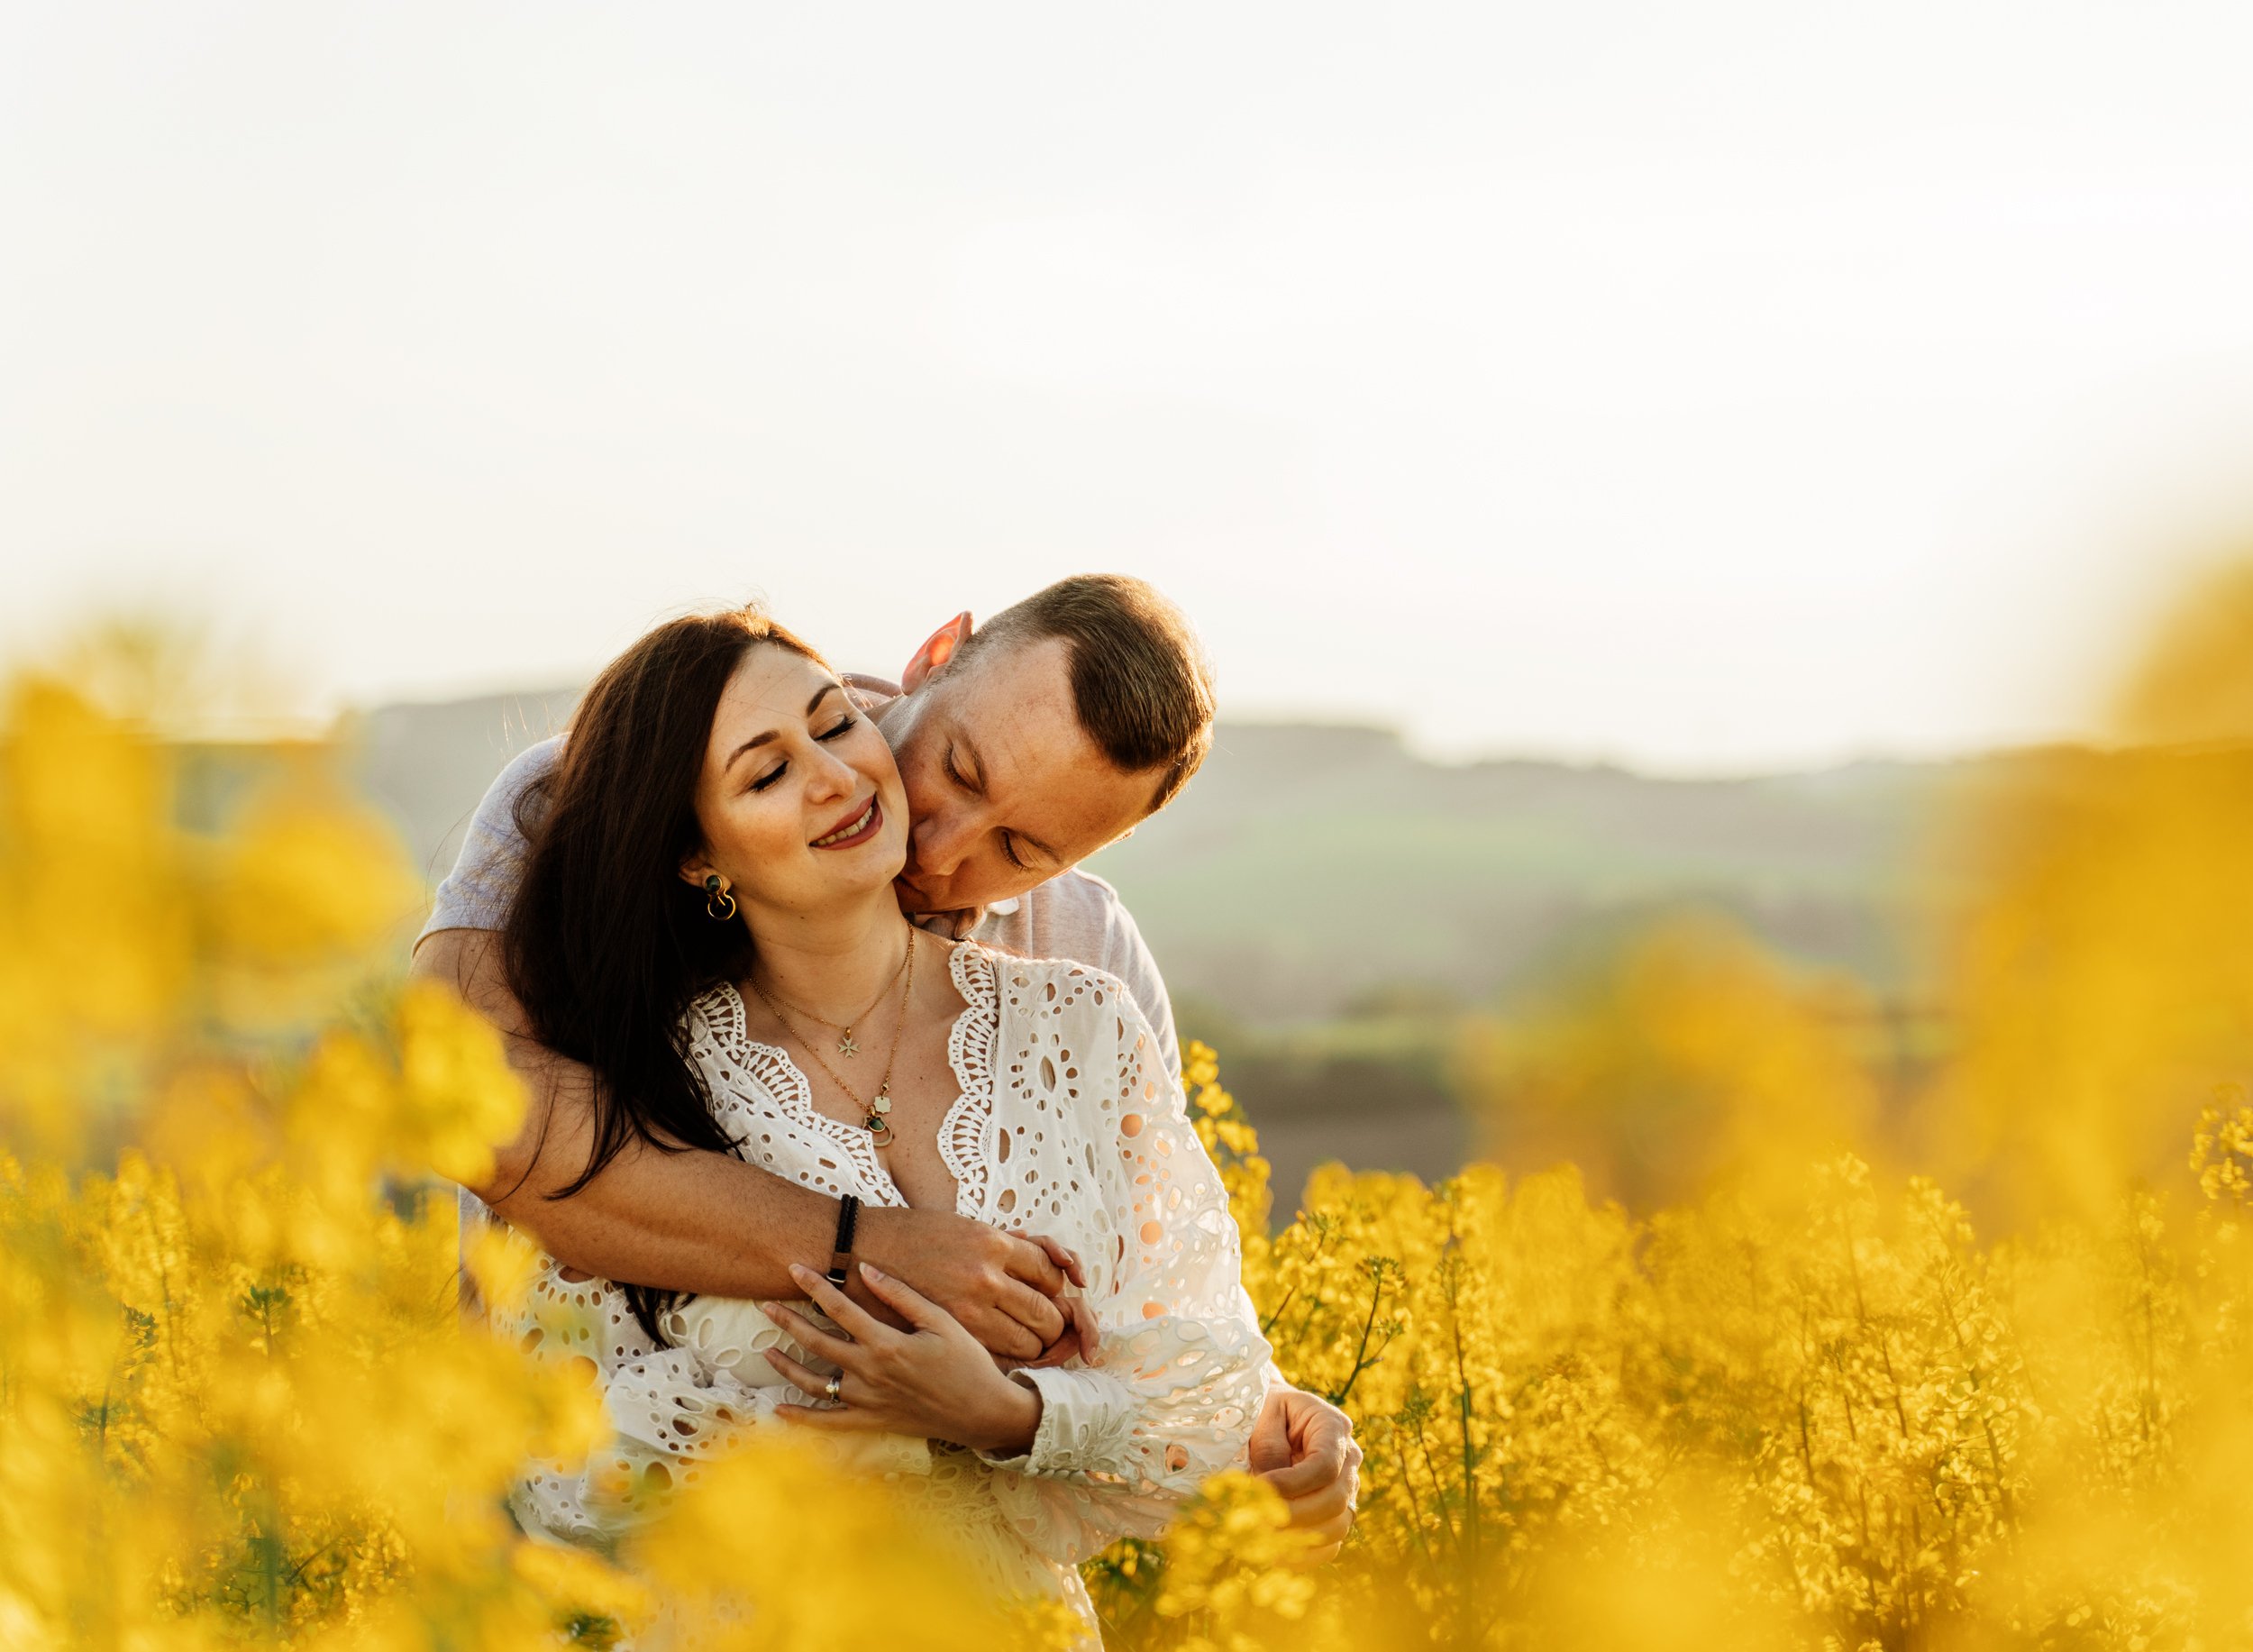 emotive-engagement-photo-session-in-yellow-flower-fields-in-ramstein-germany-by-sarah-havens (3).jpg